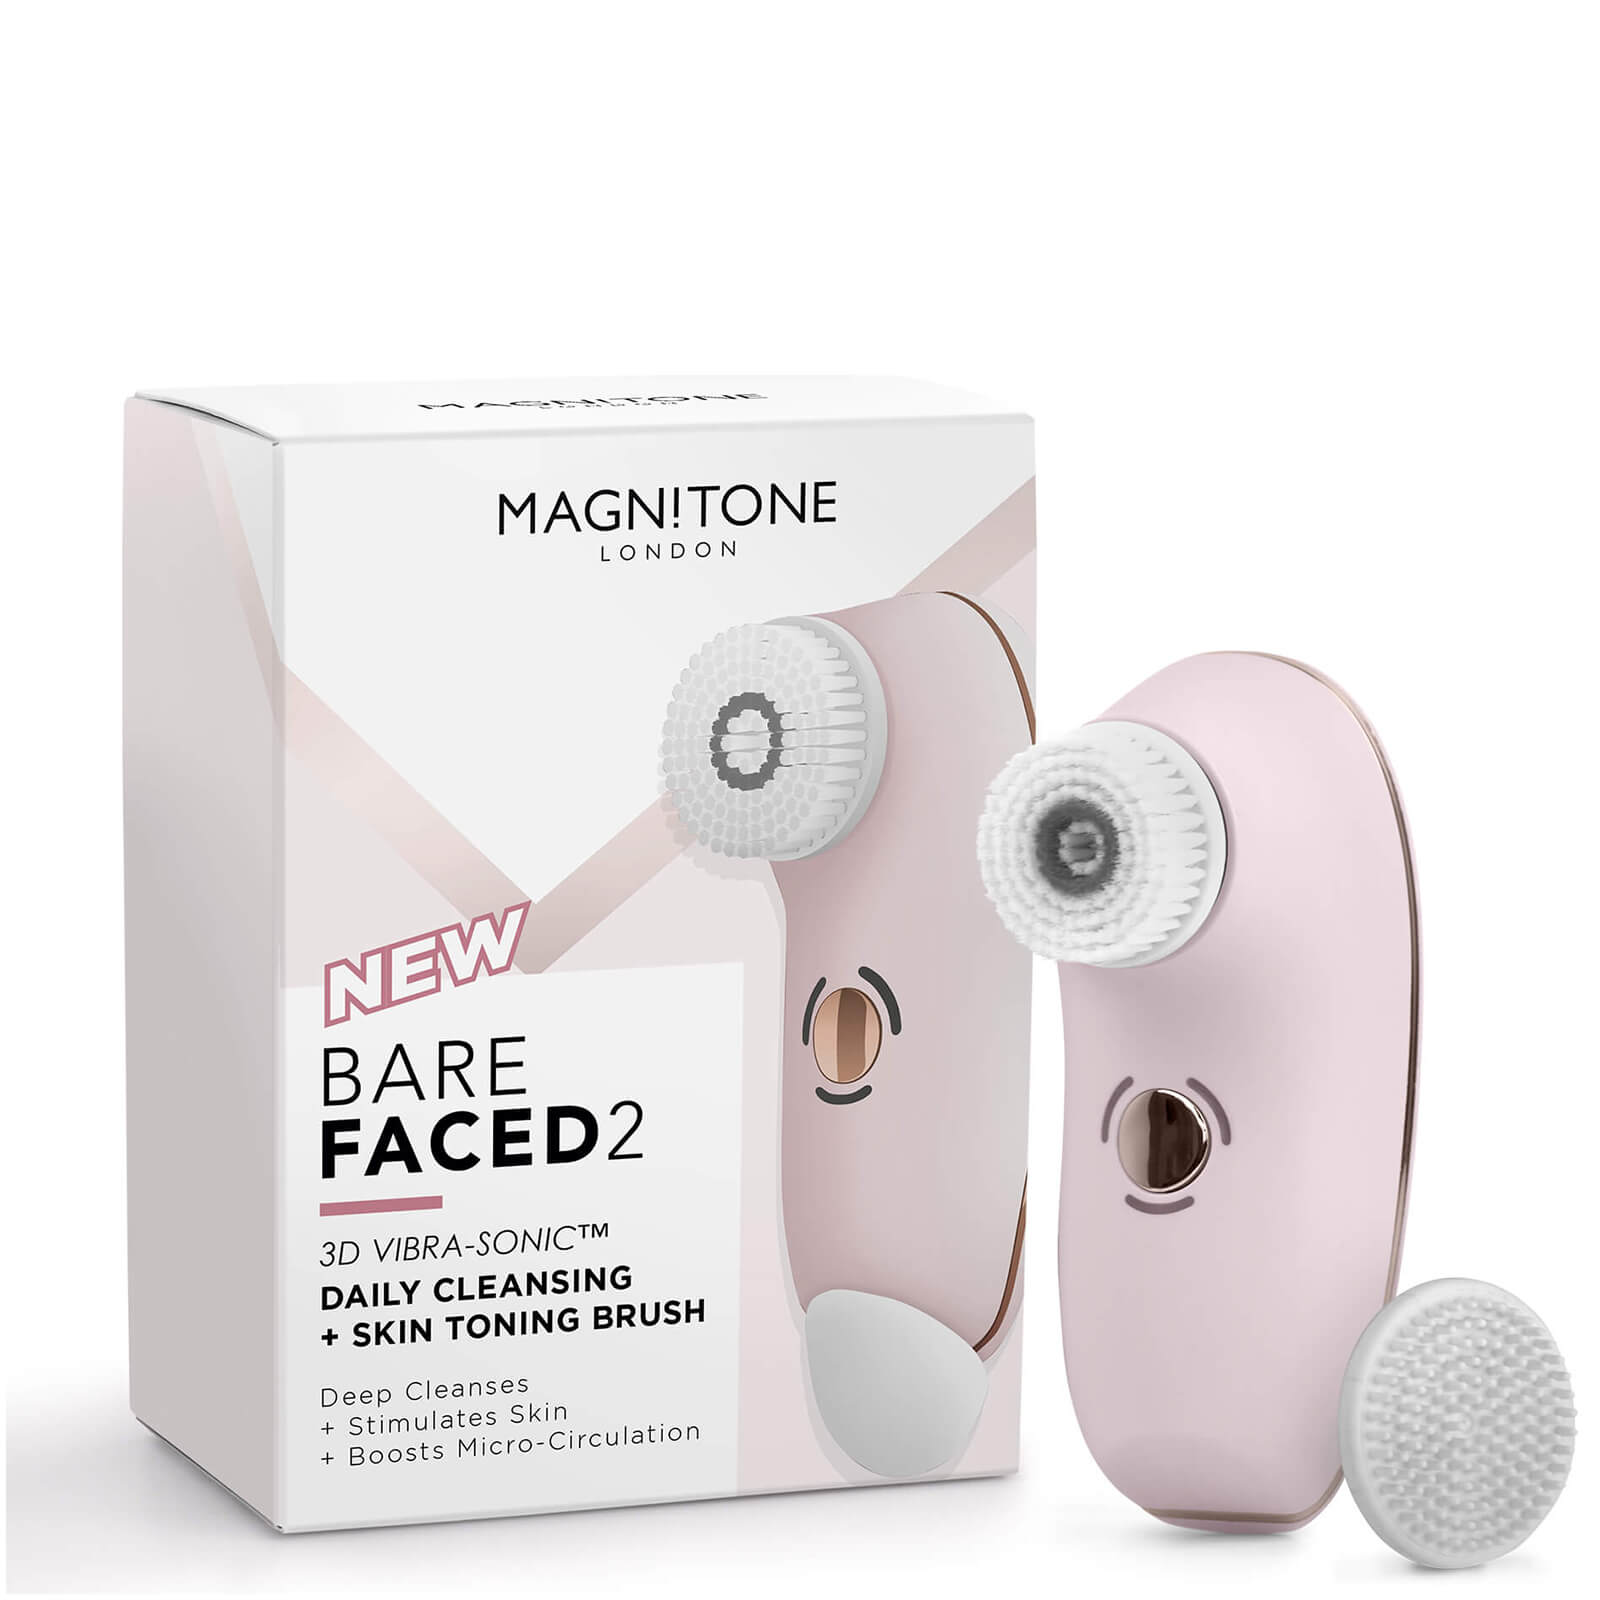 Magnitone London BareFaced 2 Daily Cleansing and Skin Toning Brush - Pink